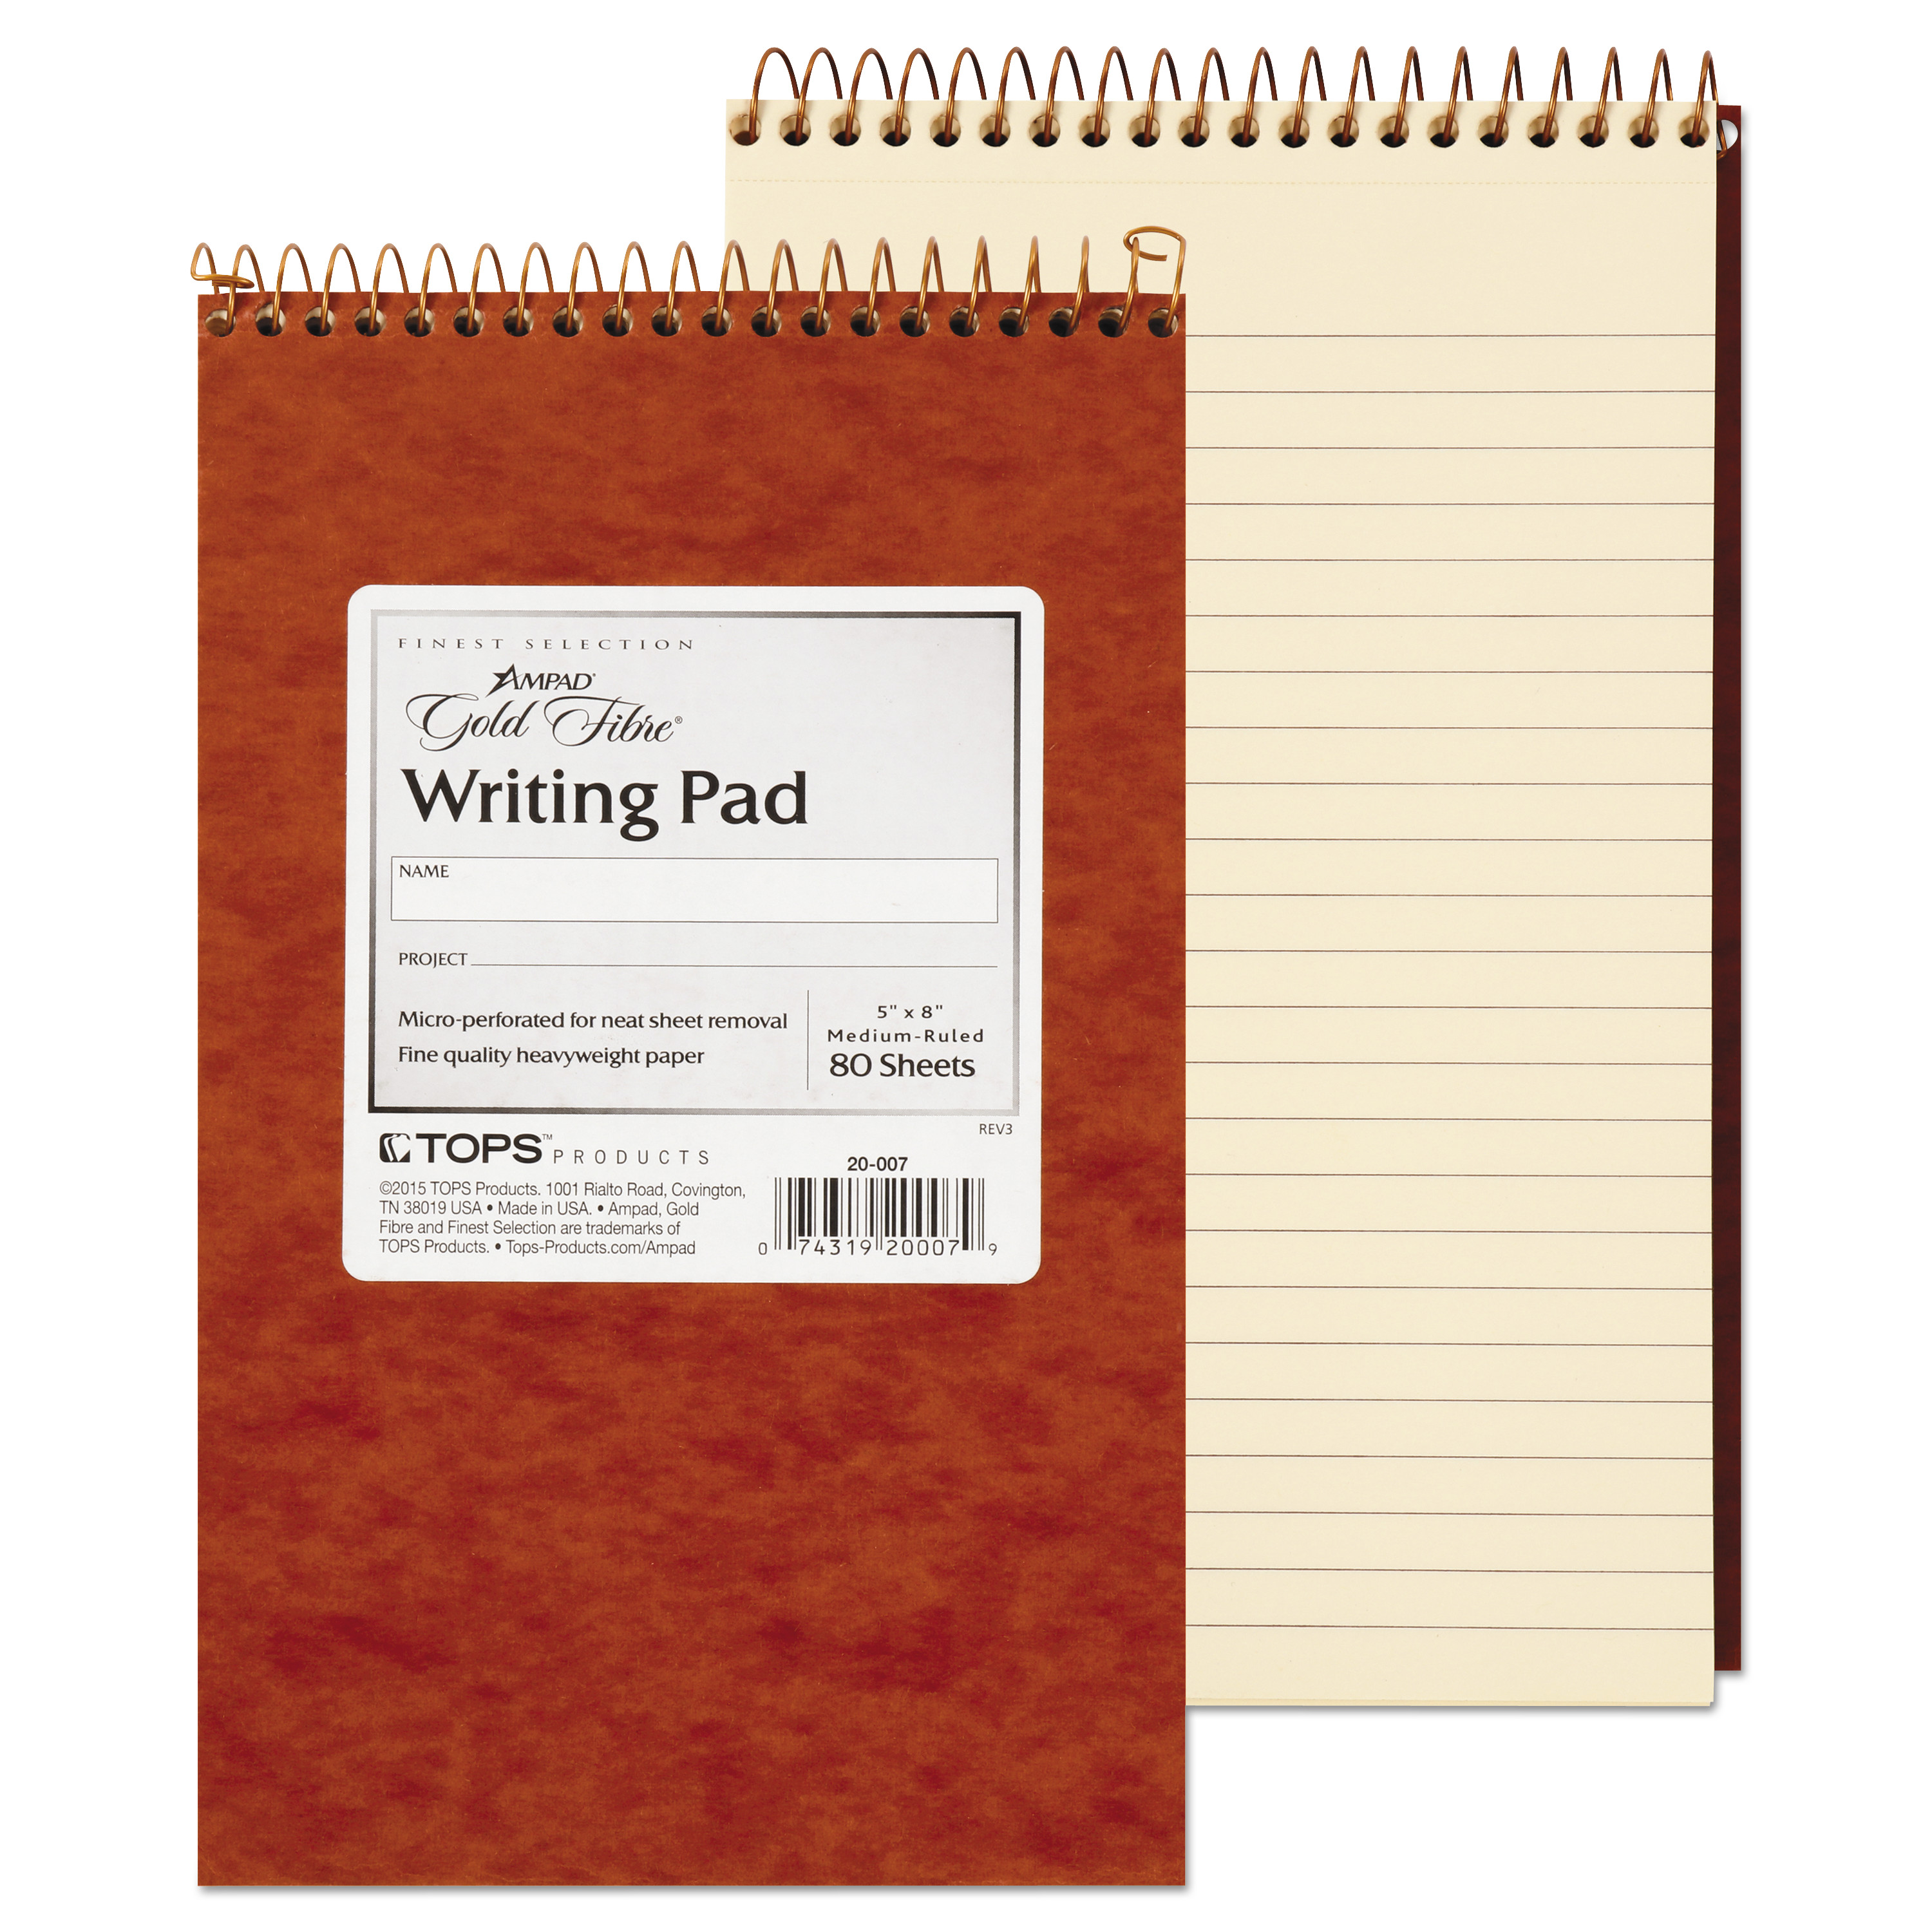  Ampad 20-007 Gold Fibre Retro Wirebound Writing Pads, 1 Subject, Medium/College Rule, Red Cover, 5 x 8, 80 Sheets (TOP20007) 